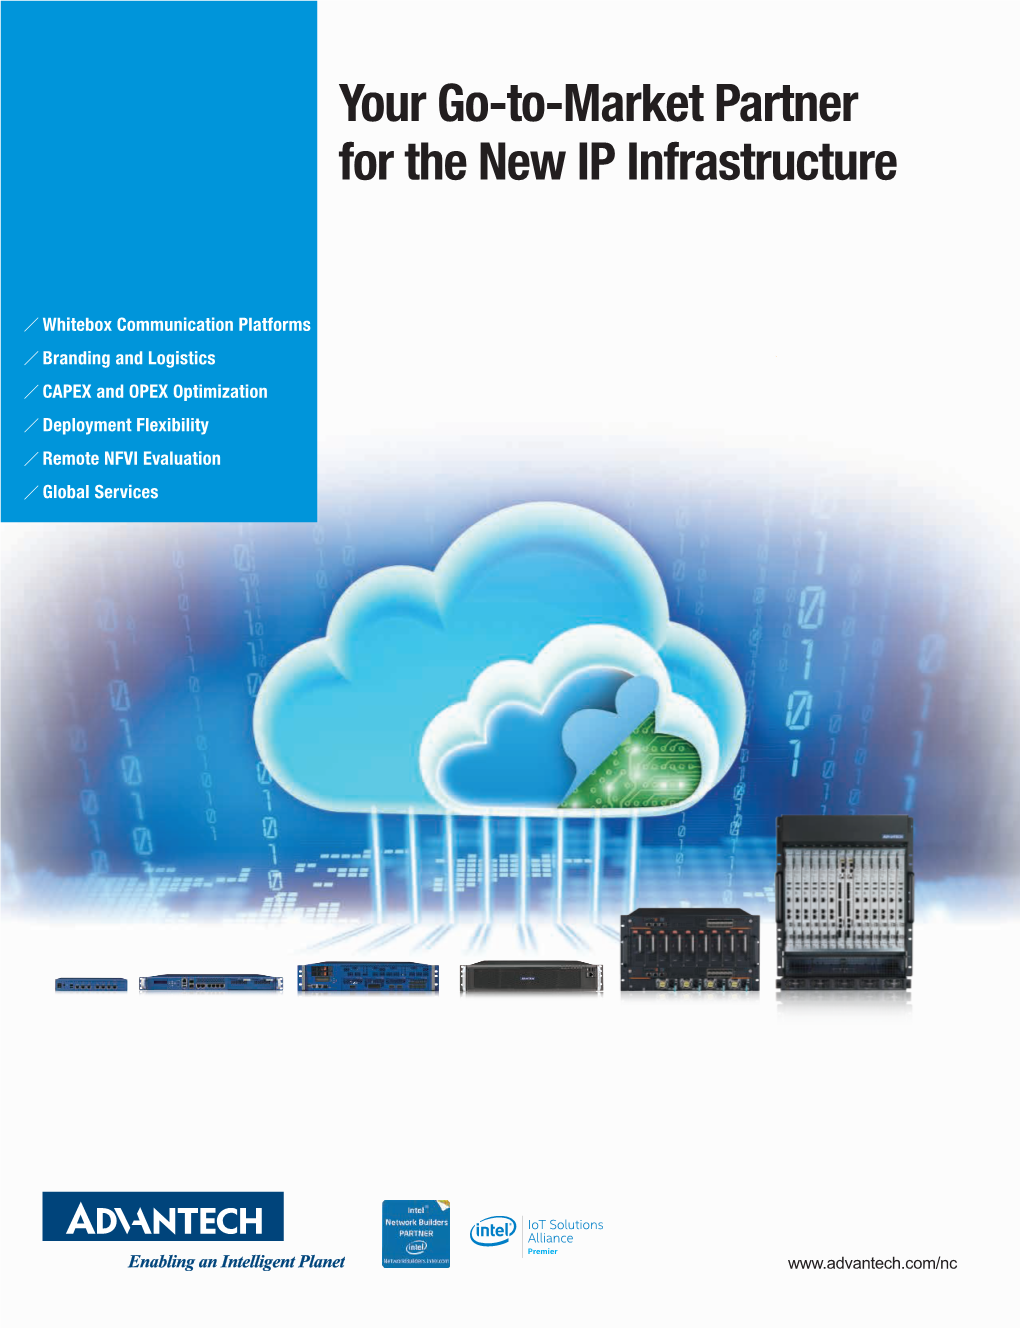 Your Go-To-Market Partner for the New IP Infrastructure